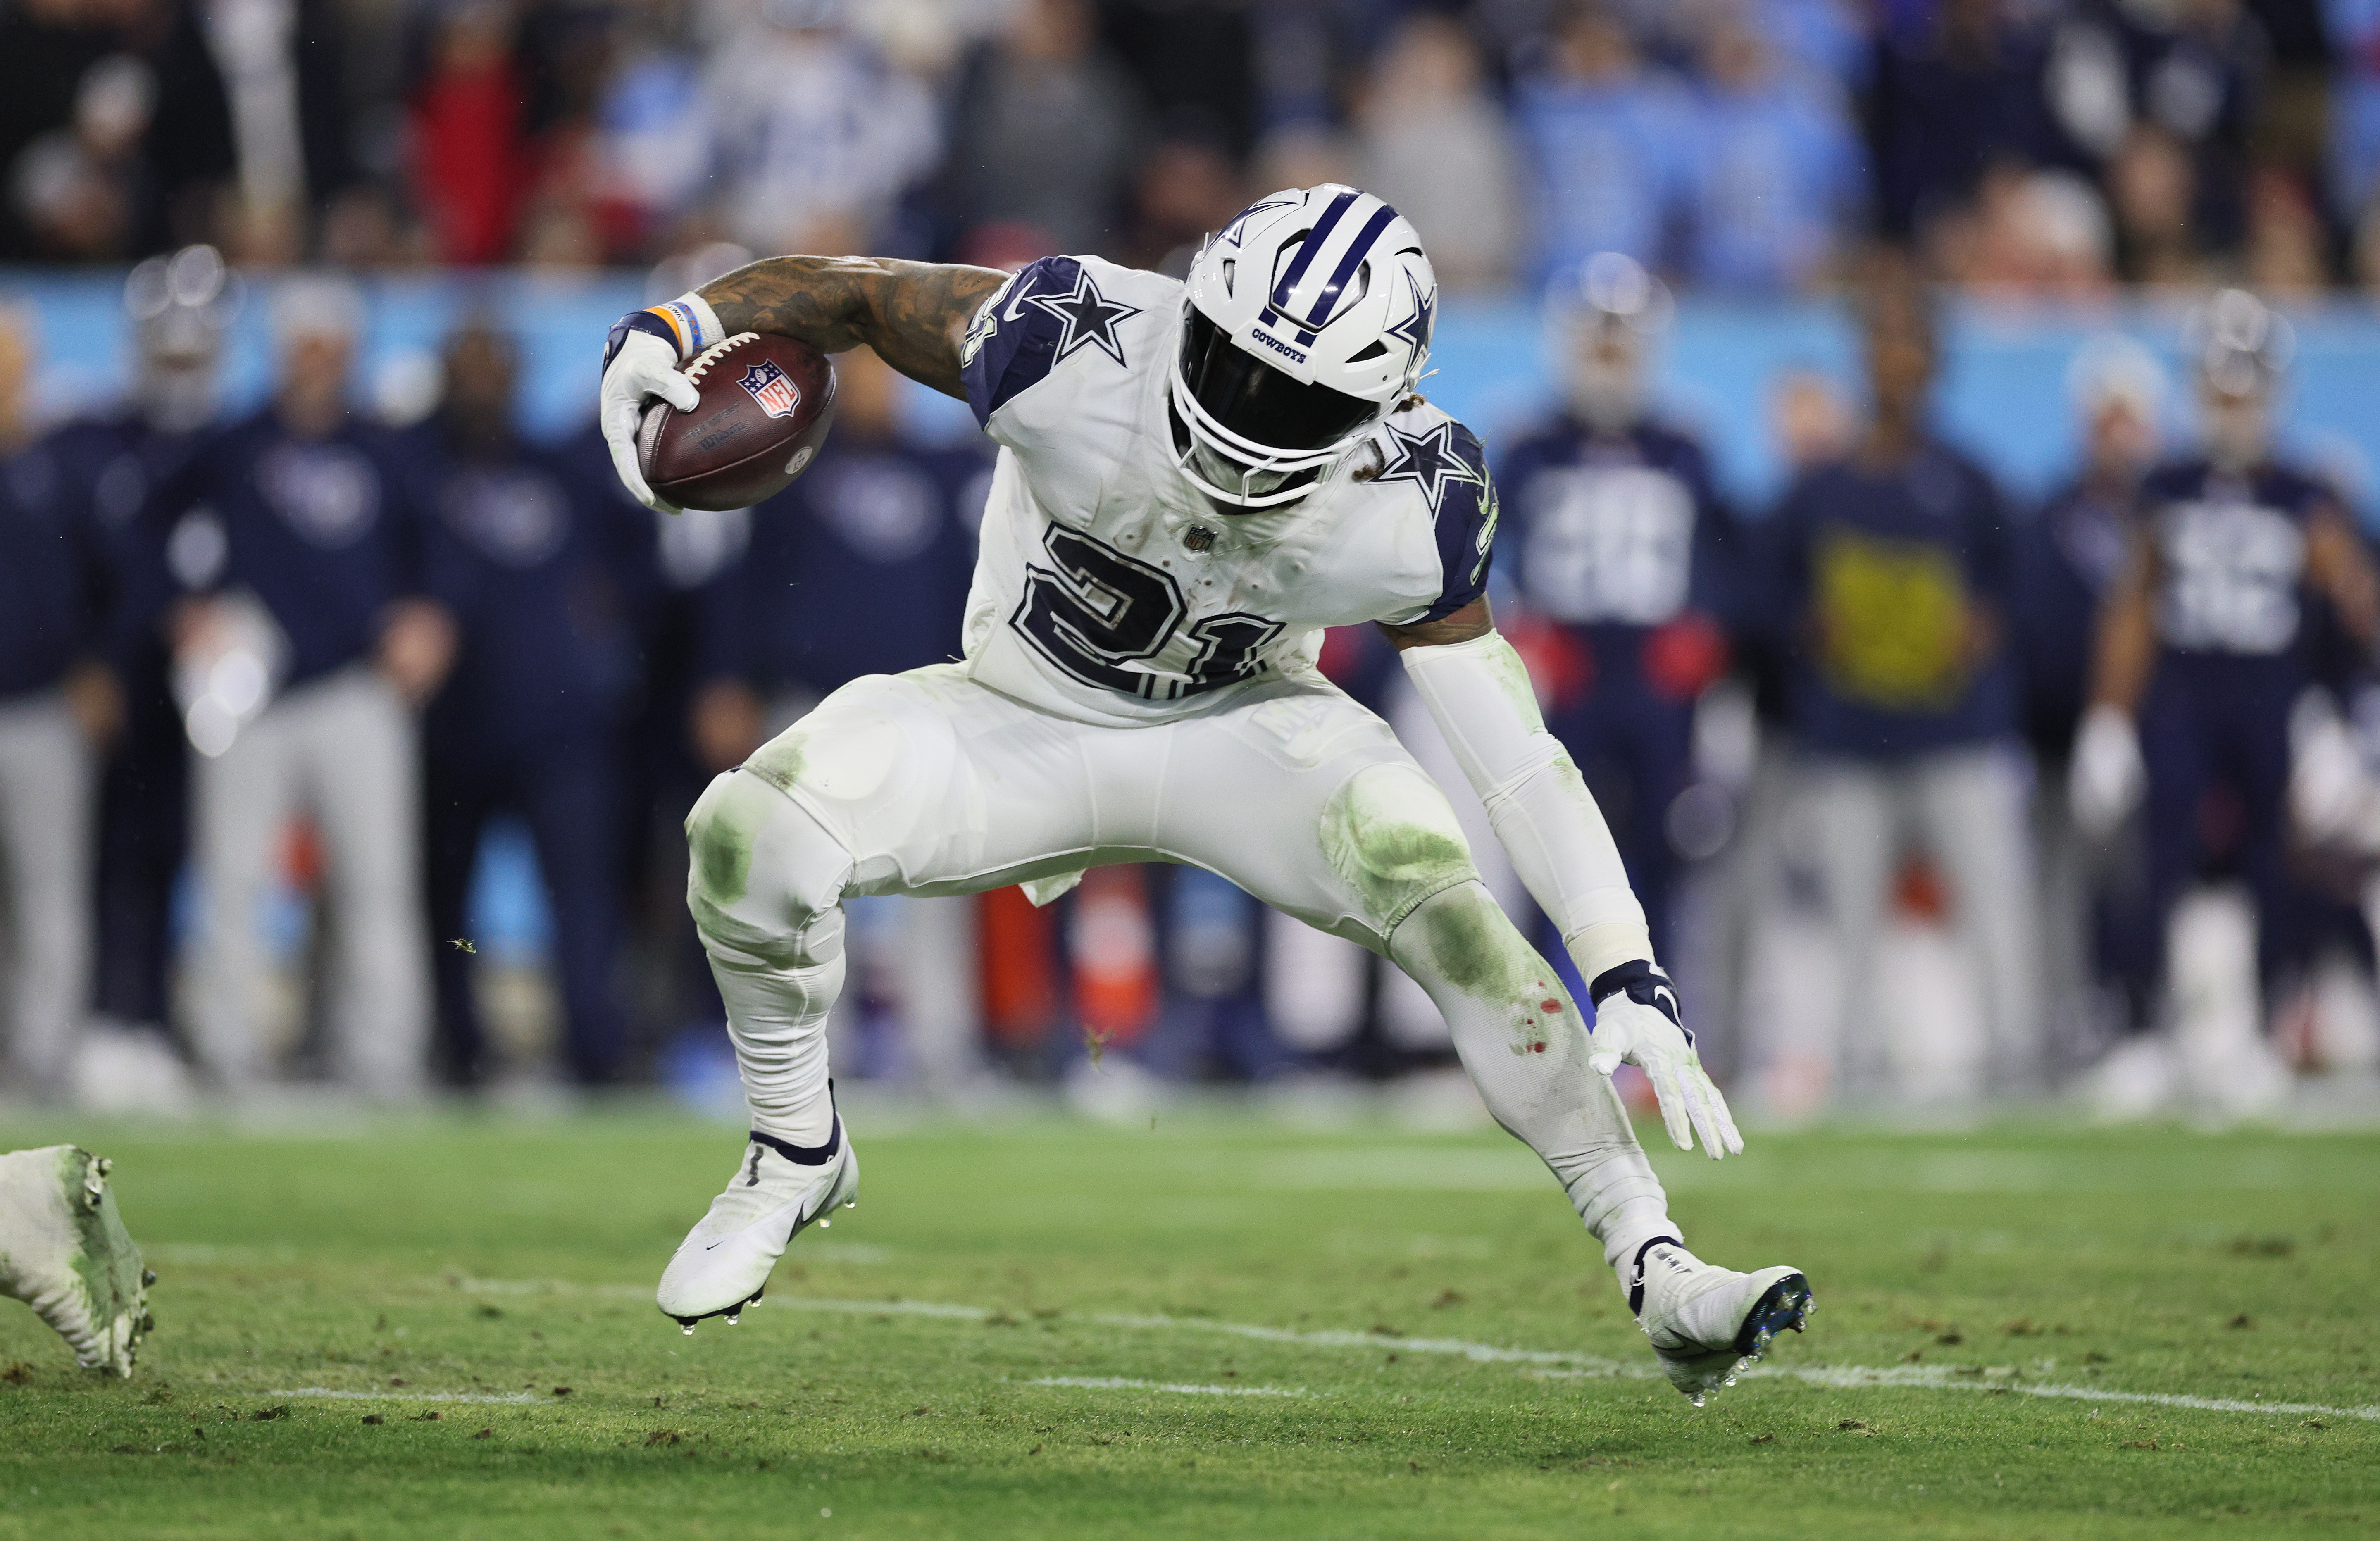 Running back Ezekiel Elliott of the Dallas Cowboys runs with the ball in the game against the Tennessee Titans at Nissan Stadium in Nashville, Tennessee, December 29, 2022. /CFP